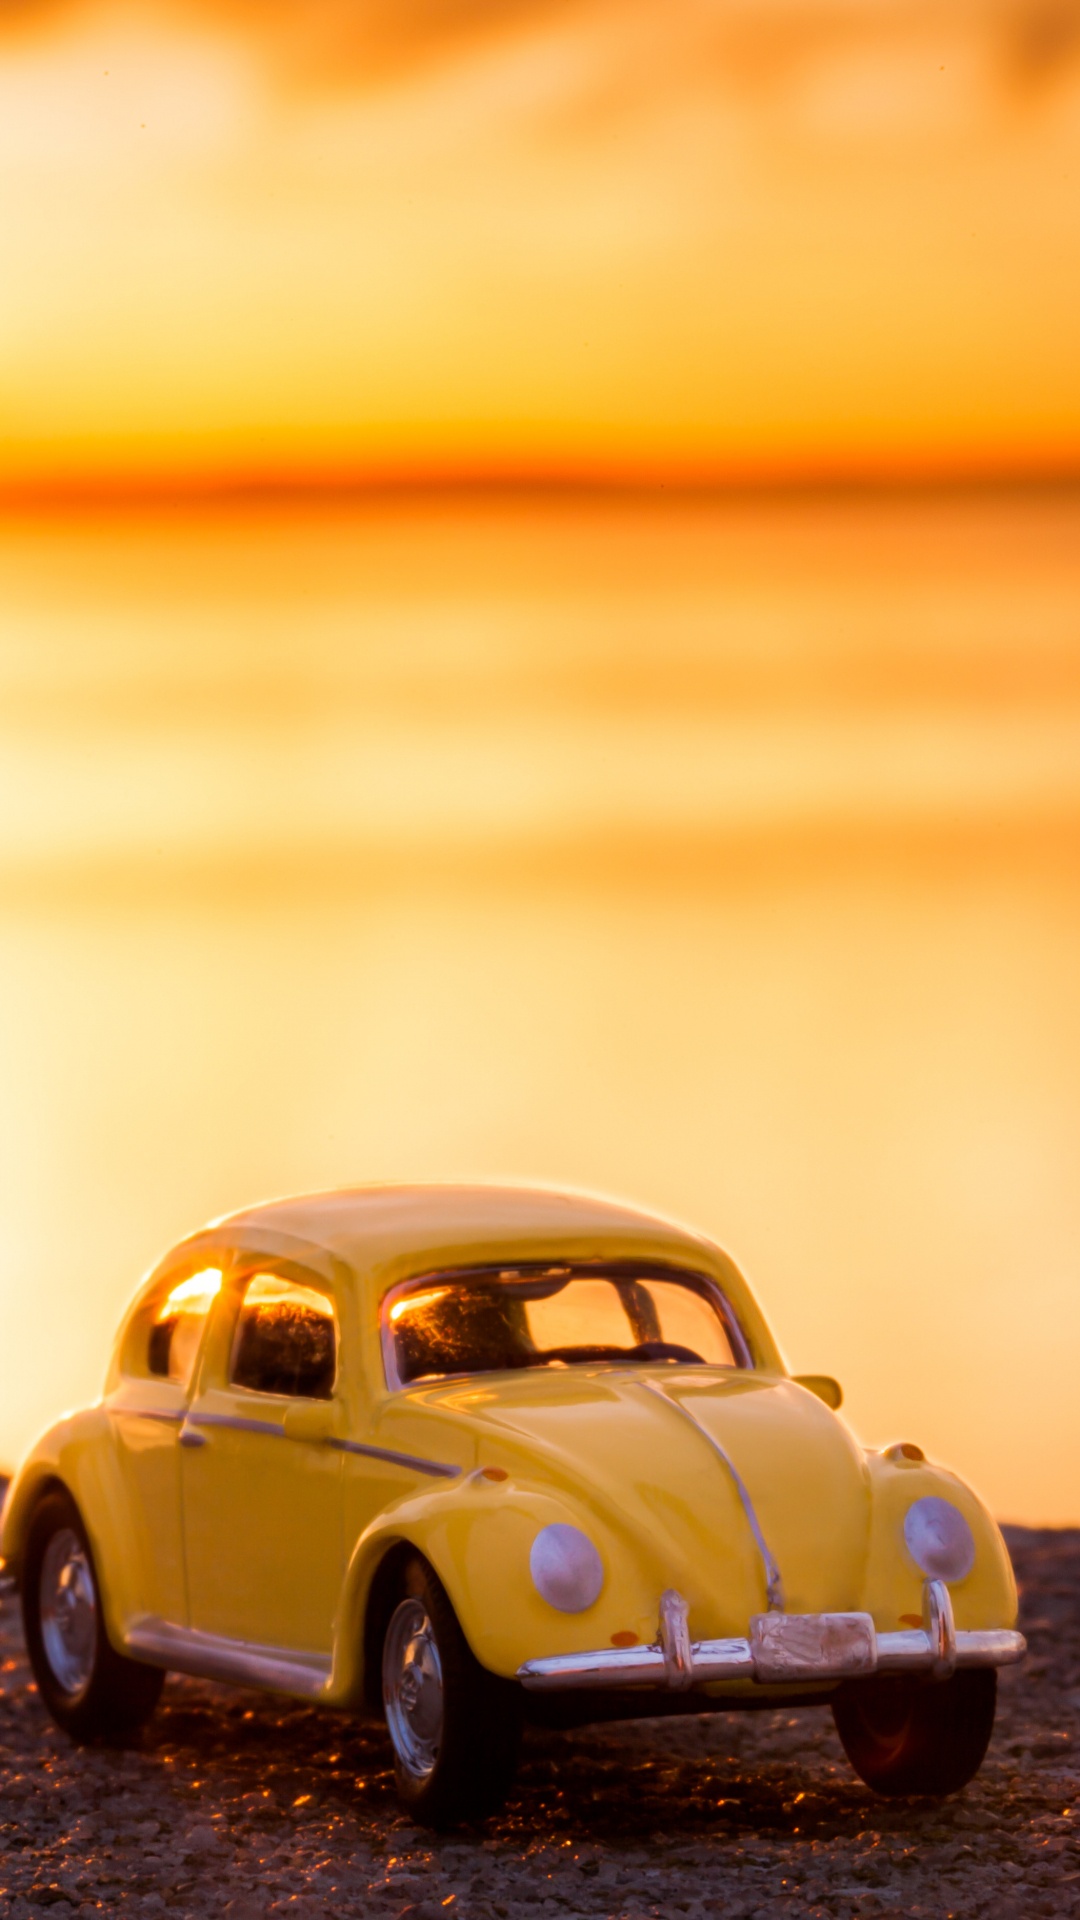 Yellow Volkswagen Beetle on Shore During Sunset. Wallpaper in 1080x1920 Resolution